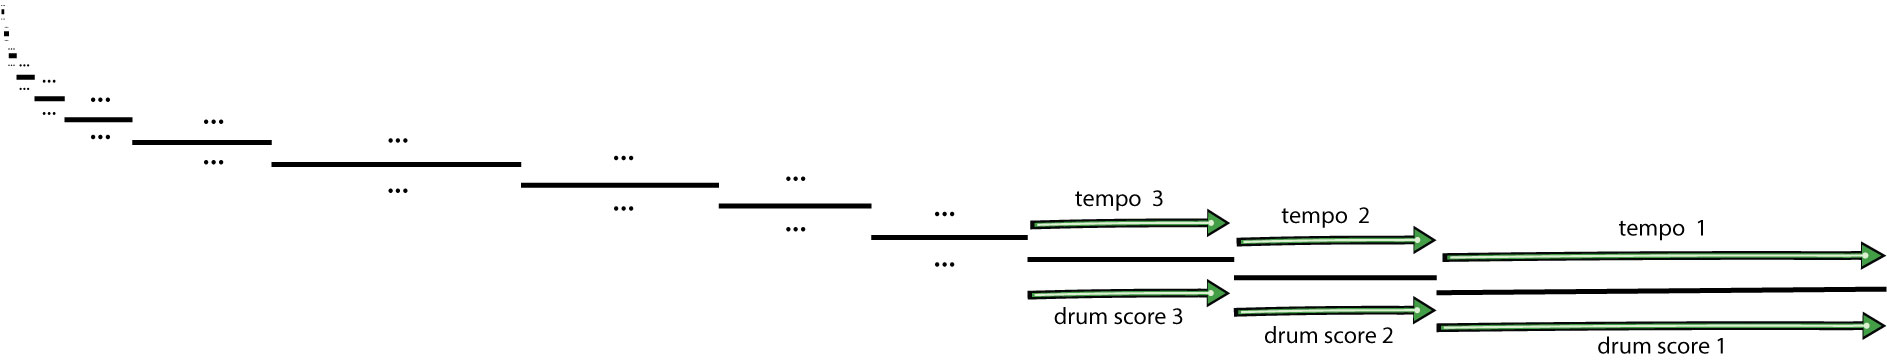 Shamanic soundscape levels with (horizontal) lines showing tempo and rhythmic complexity (drum score) remaining constant throughout each level.